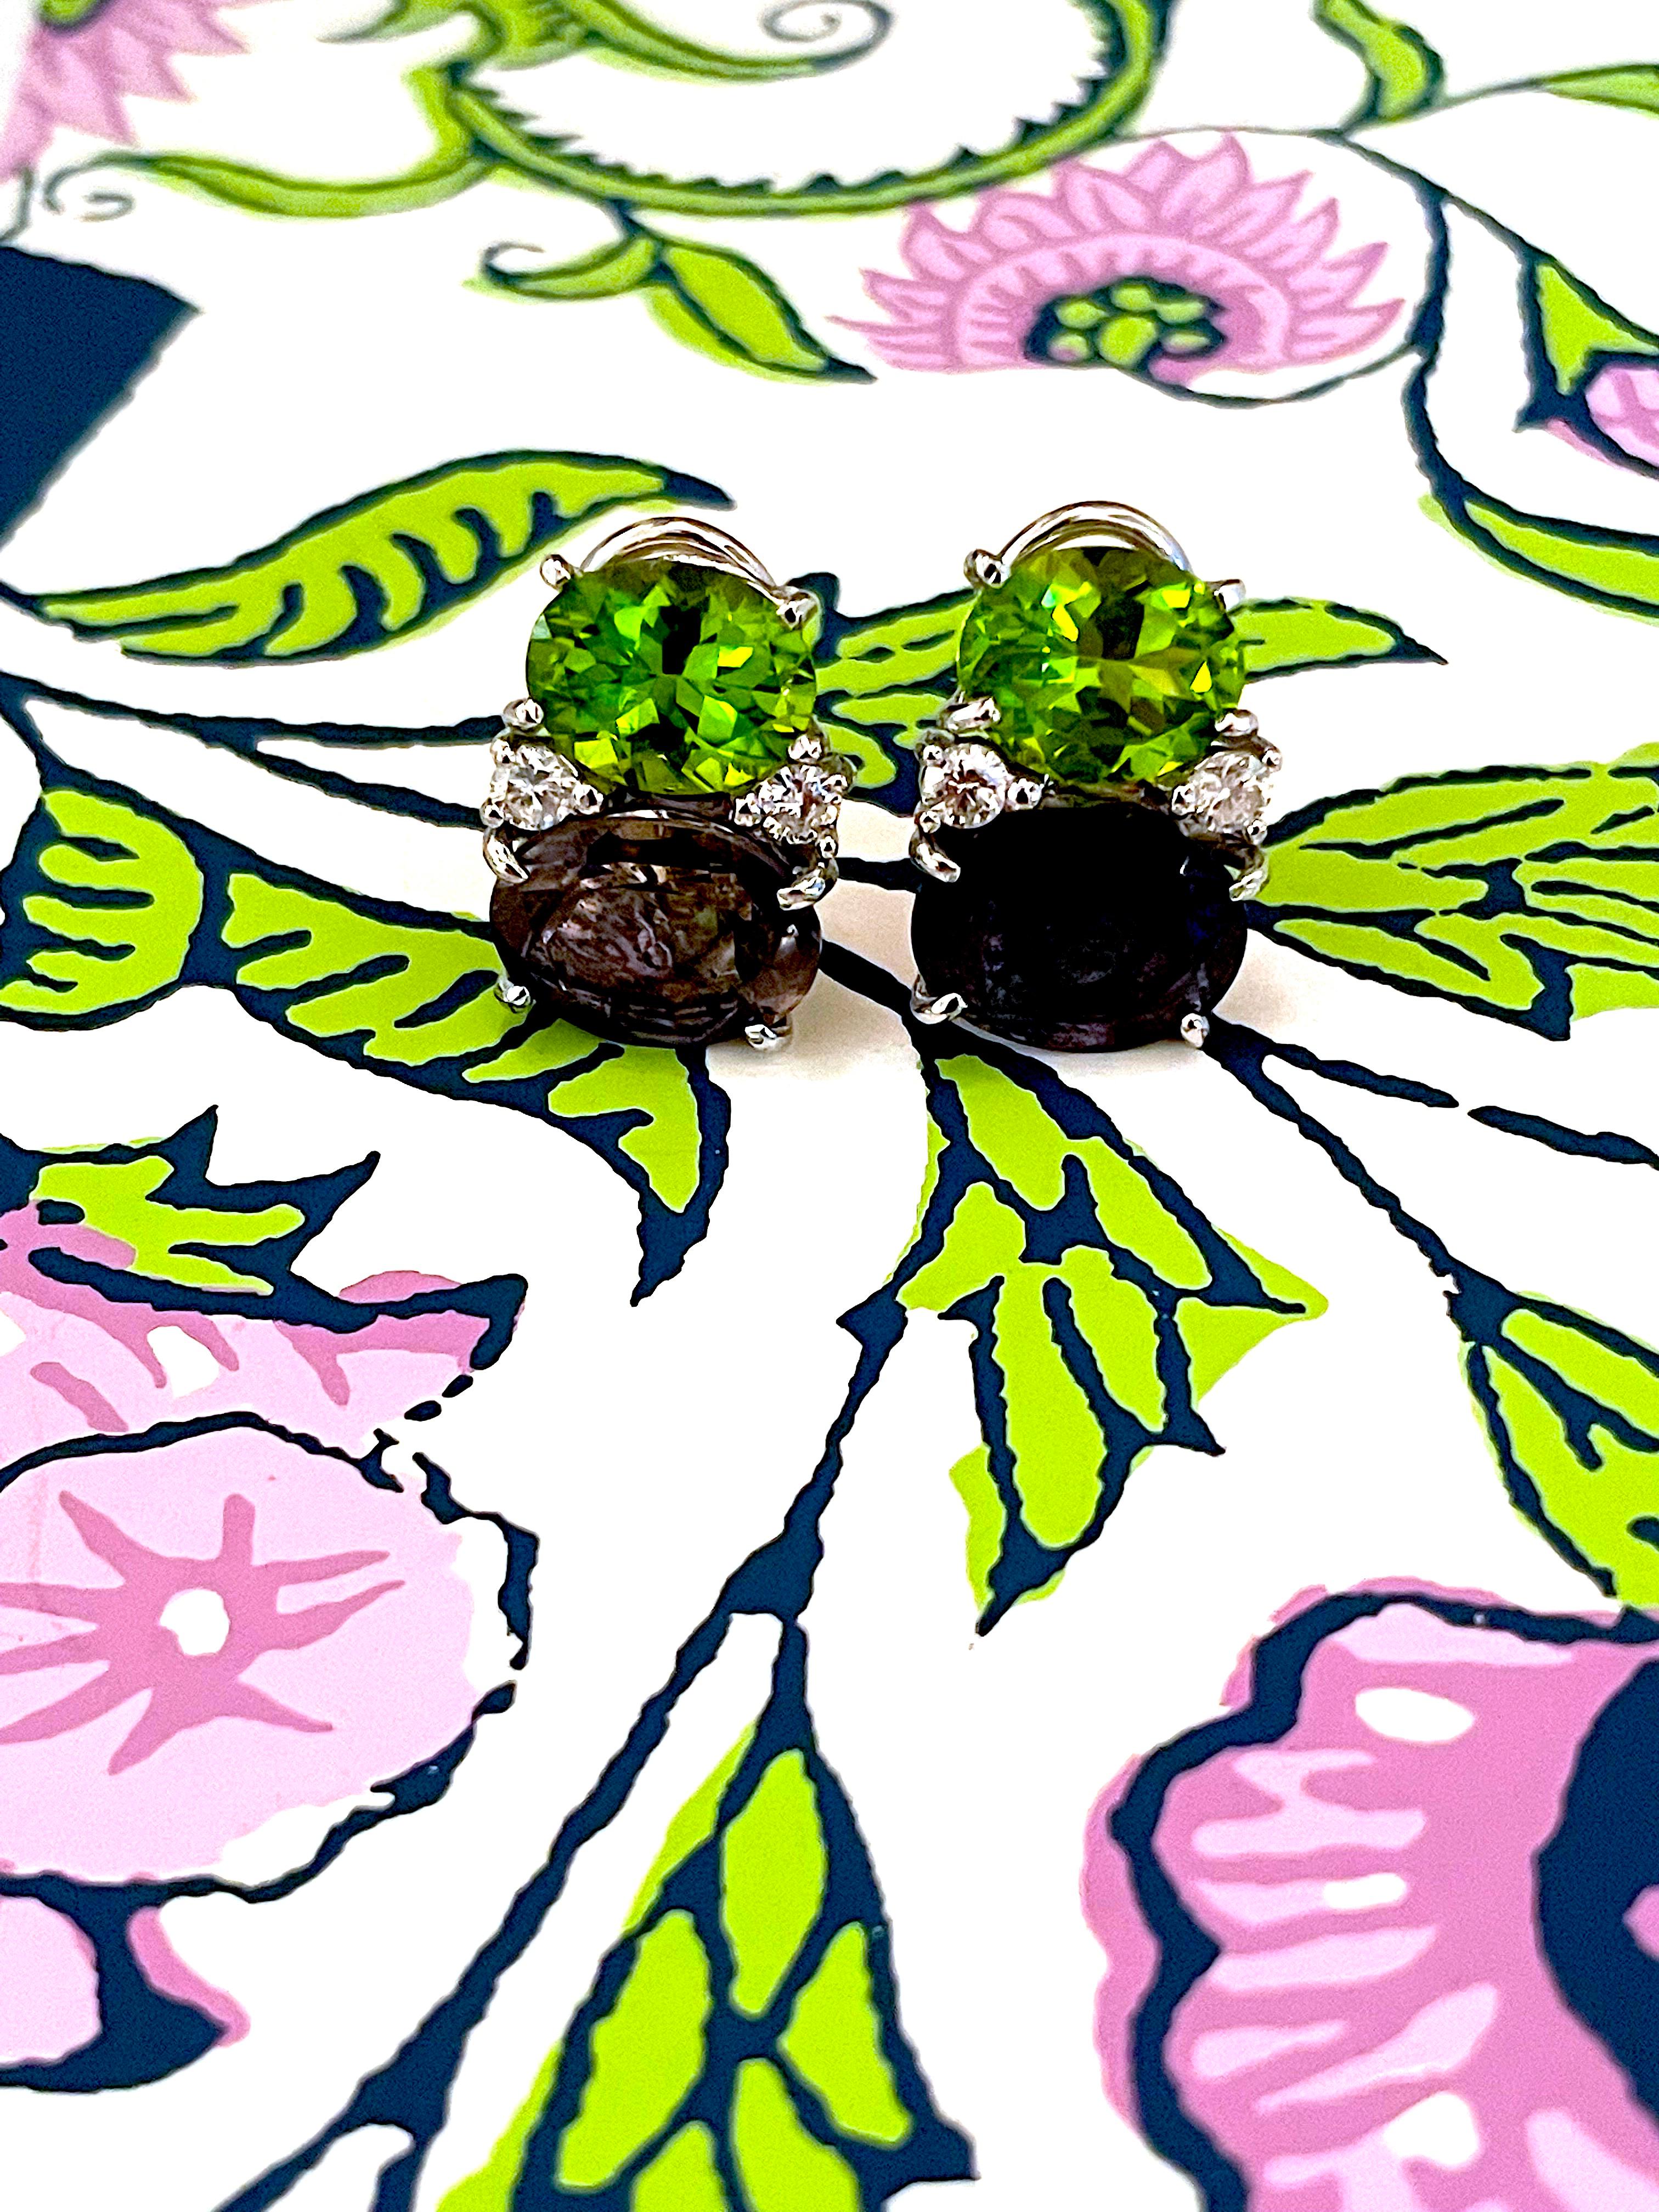 A show stopper! Peridot and Iolite set in White Gold with Diamond Accents.

The Medium 18kt White Gold GUM DROP™ earring with faceted Peridot (approximately 2.5 cts each), faceted Iolite (approximately 5 cts each), and 4 diamonds weighing ~0.40